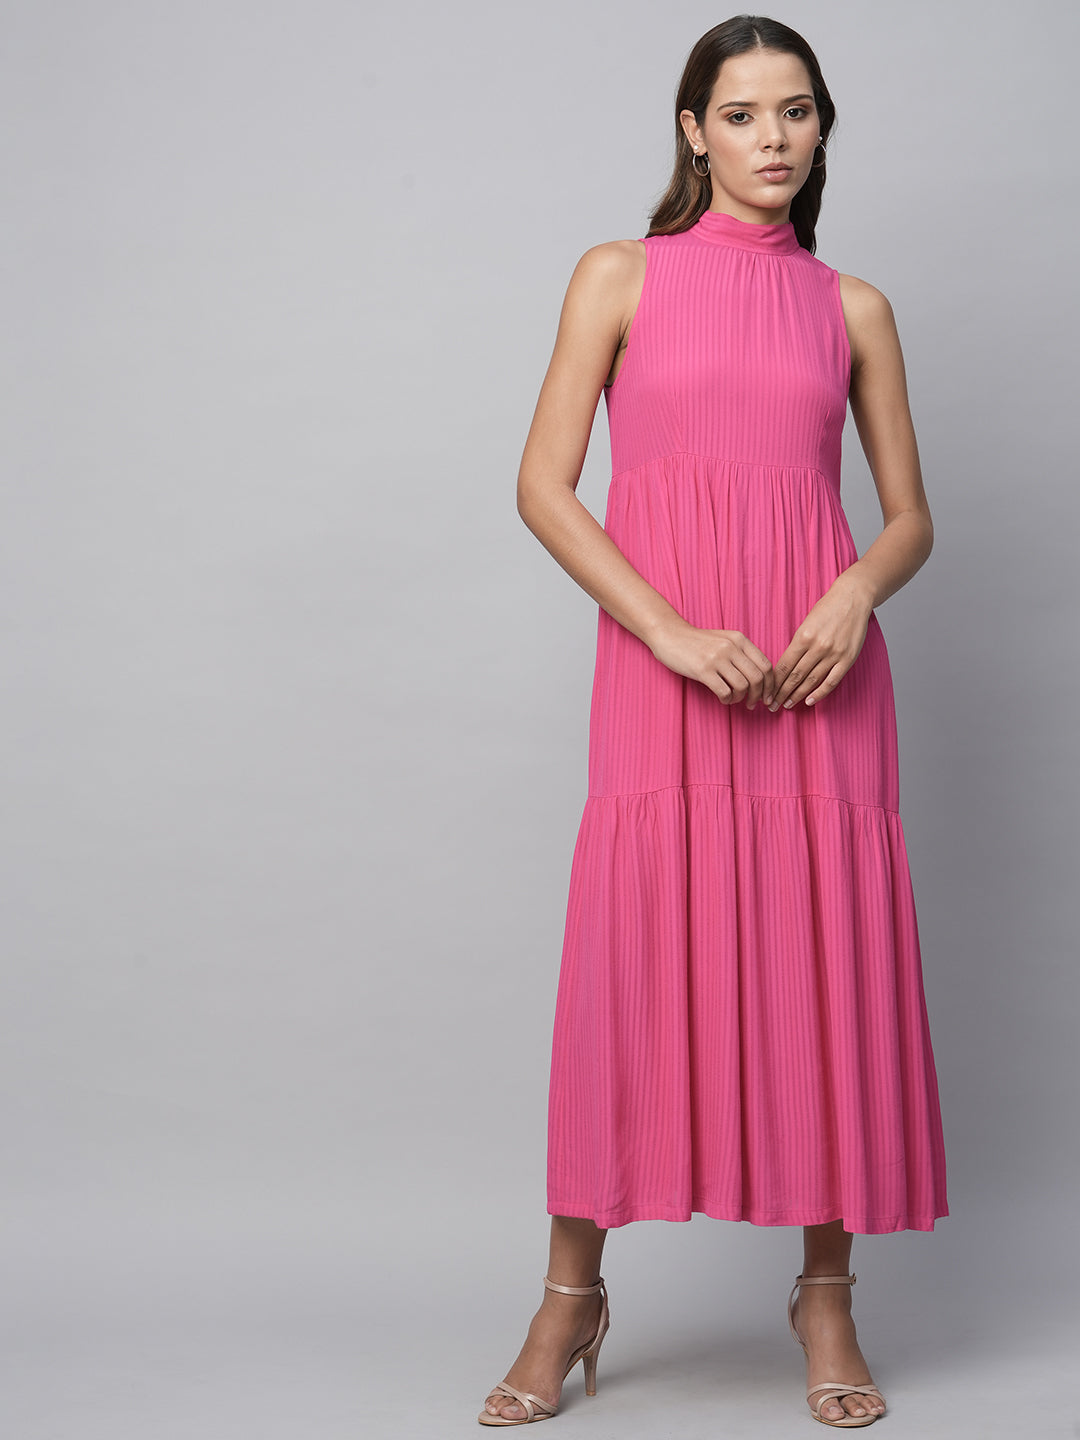 Viscose Crepe Dobby Incut Tie Neck, Tiered Dress